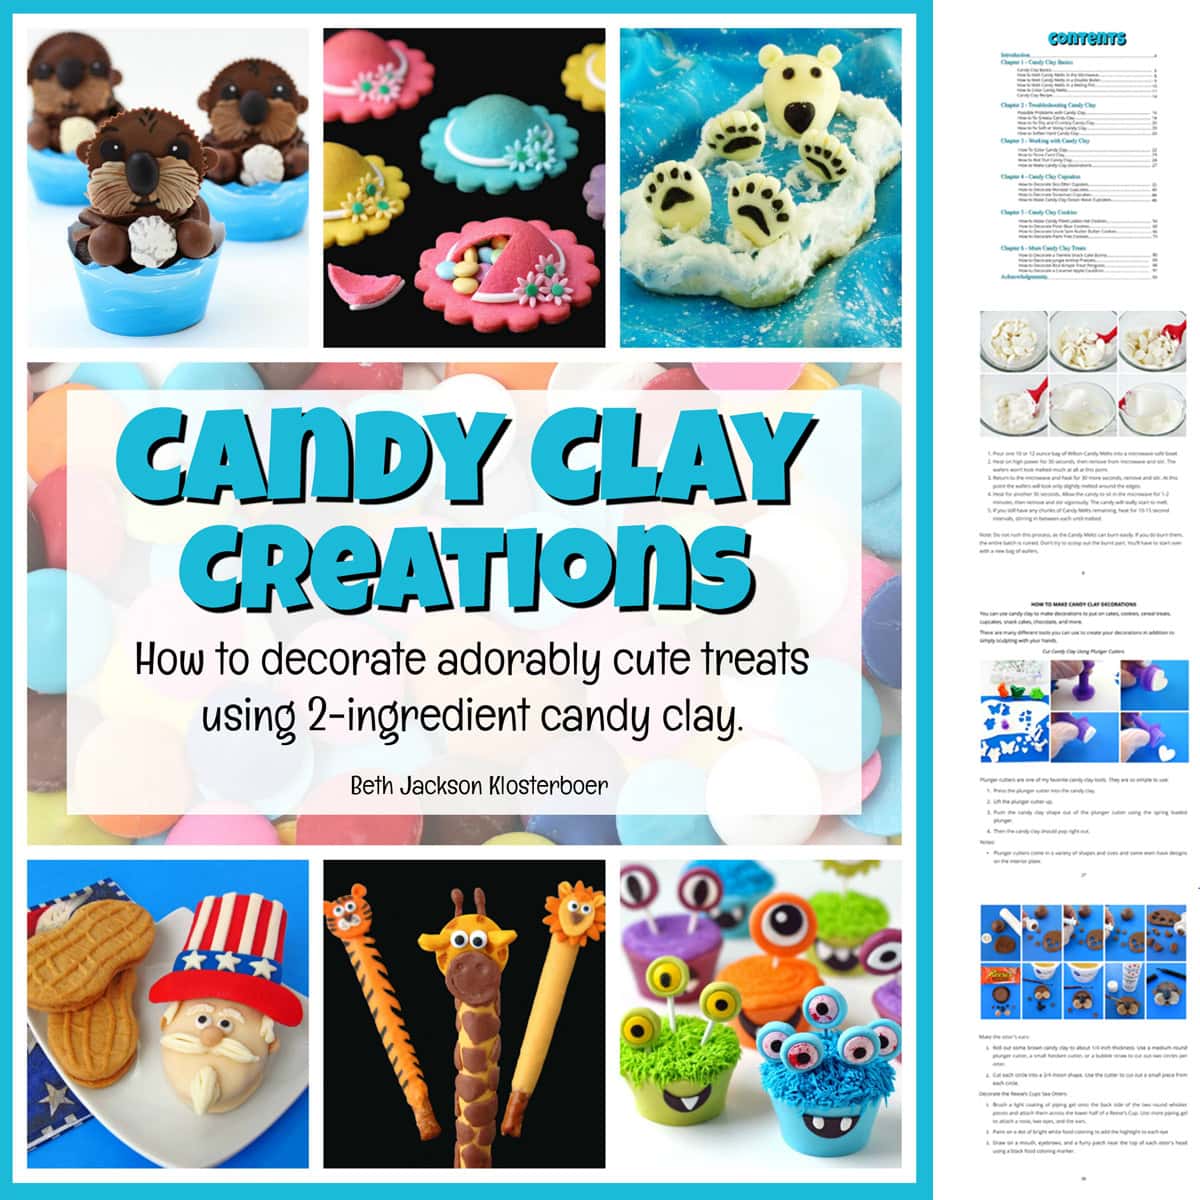 candy clay creations cookbook featuring modeling chocolate decorations